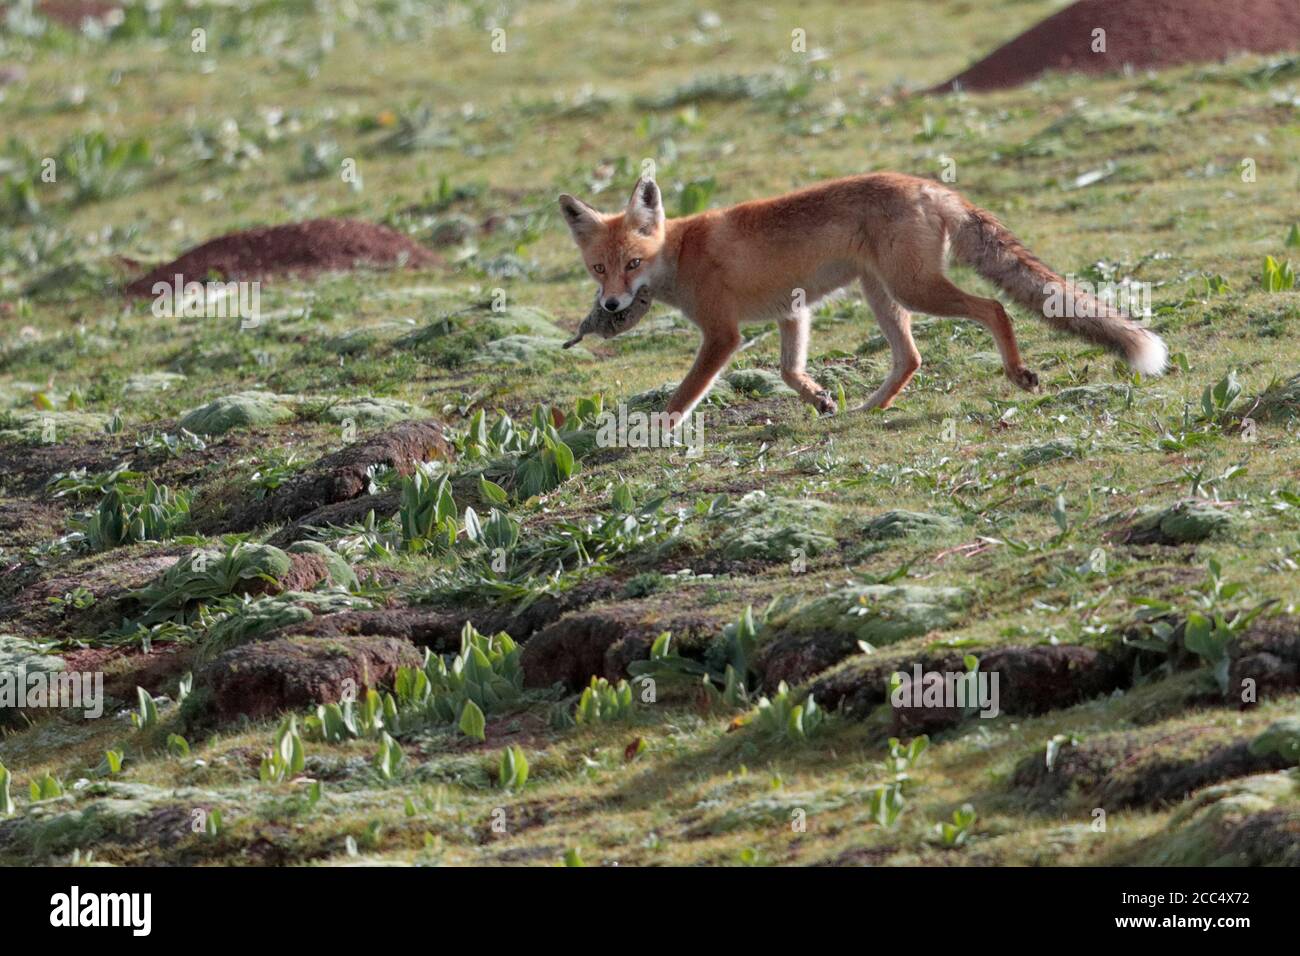 Red Fox (Vulpes vulpes), with pika sp. prey, roadside, S 308 road west of Yushu, Qinghai Province, China 23 August 2017 Stock Photo